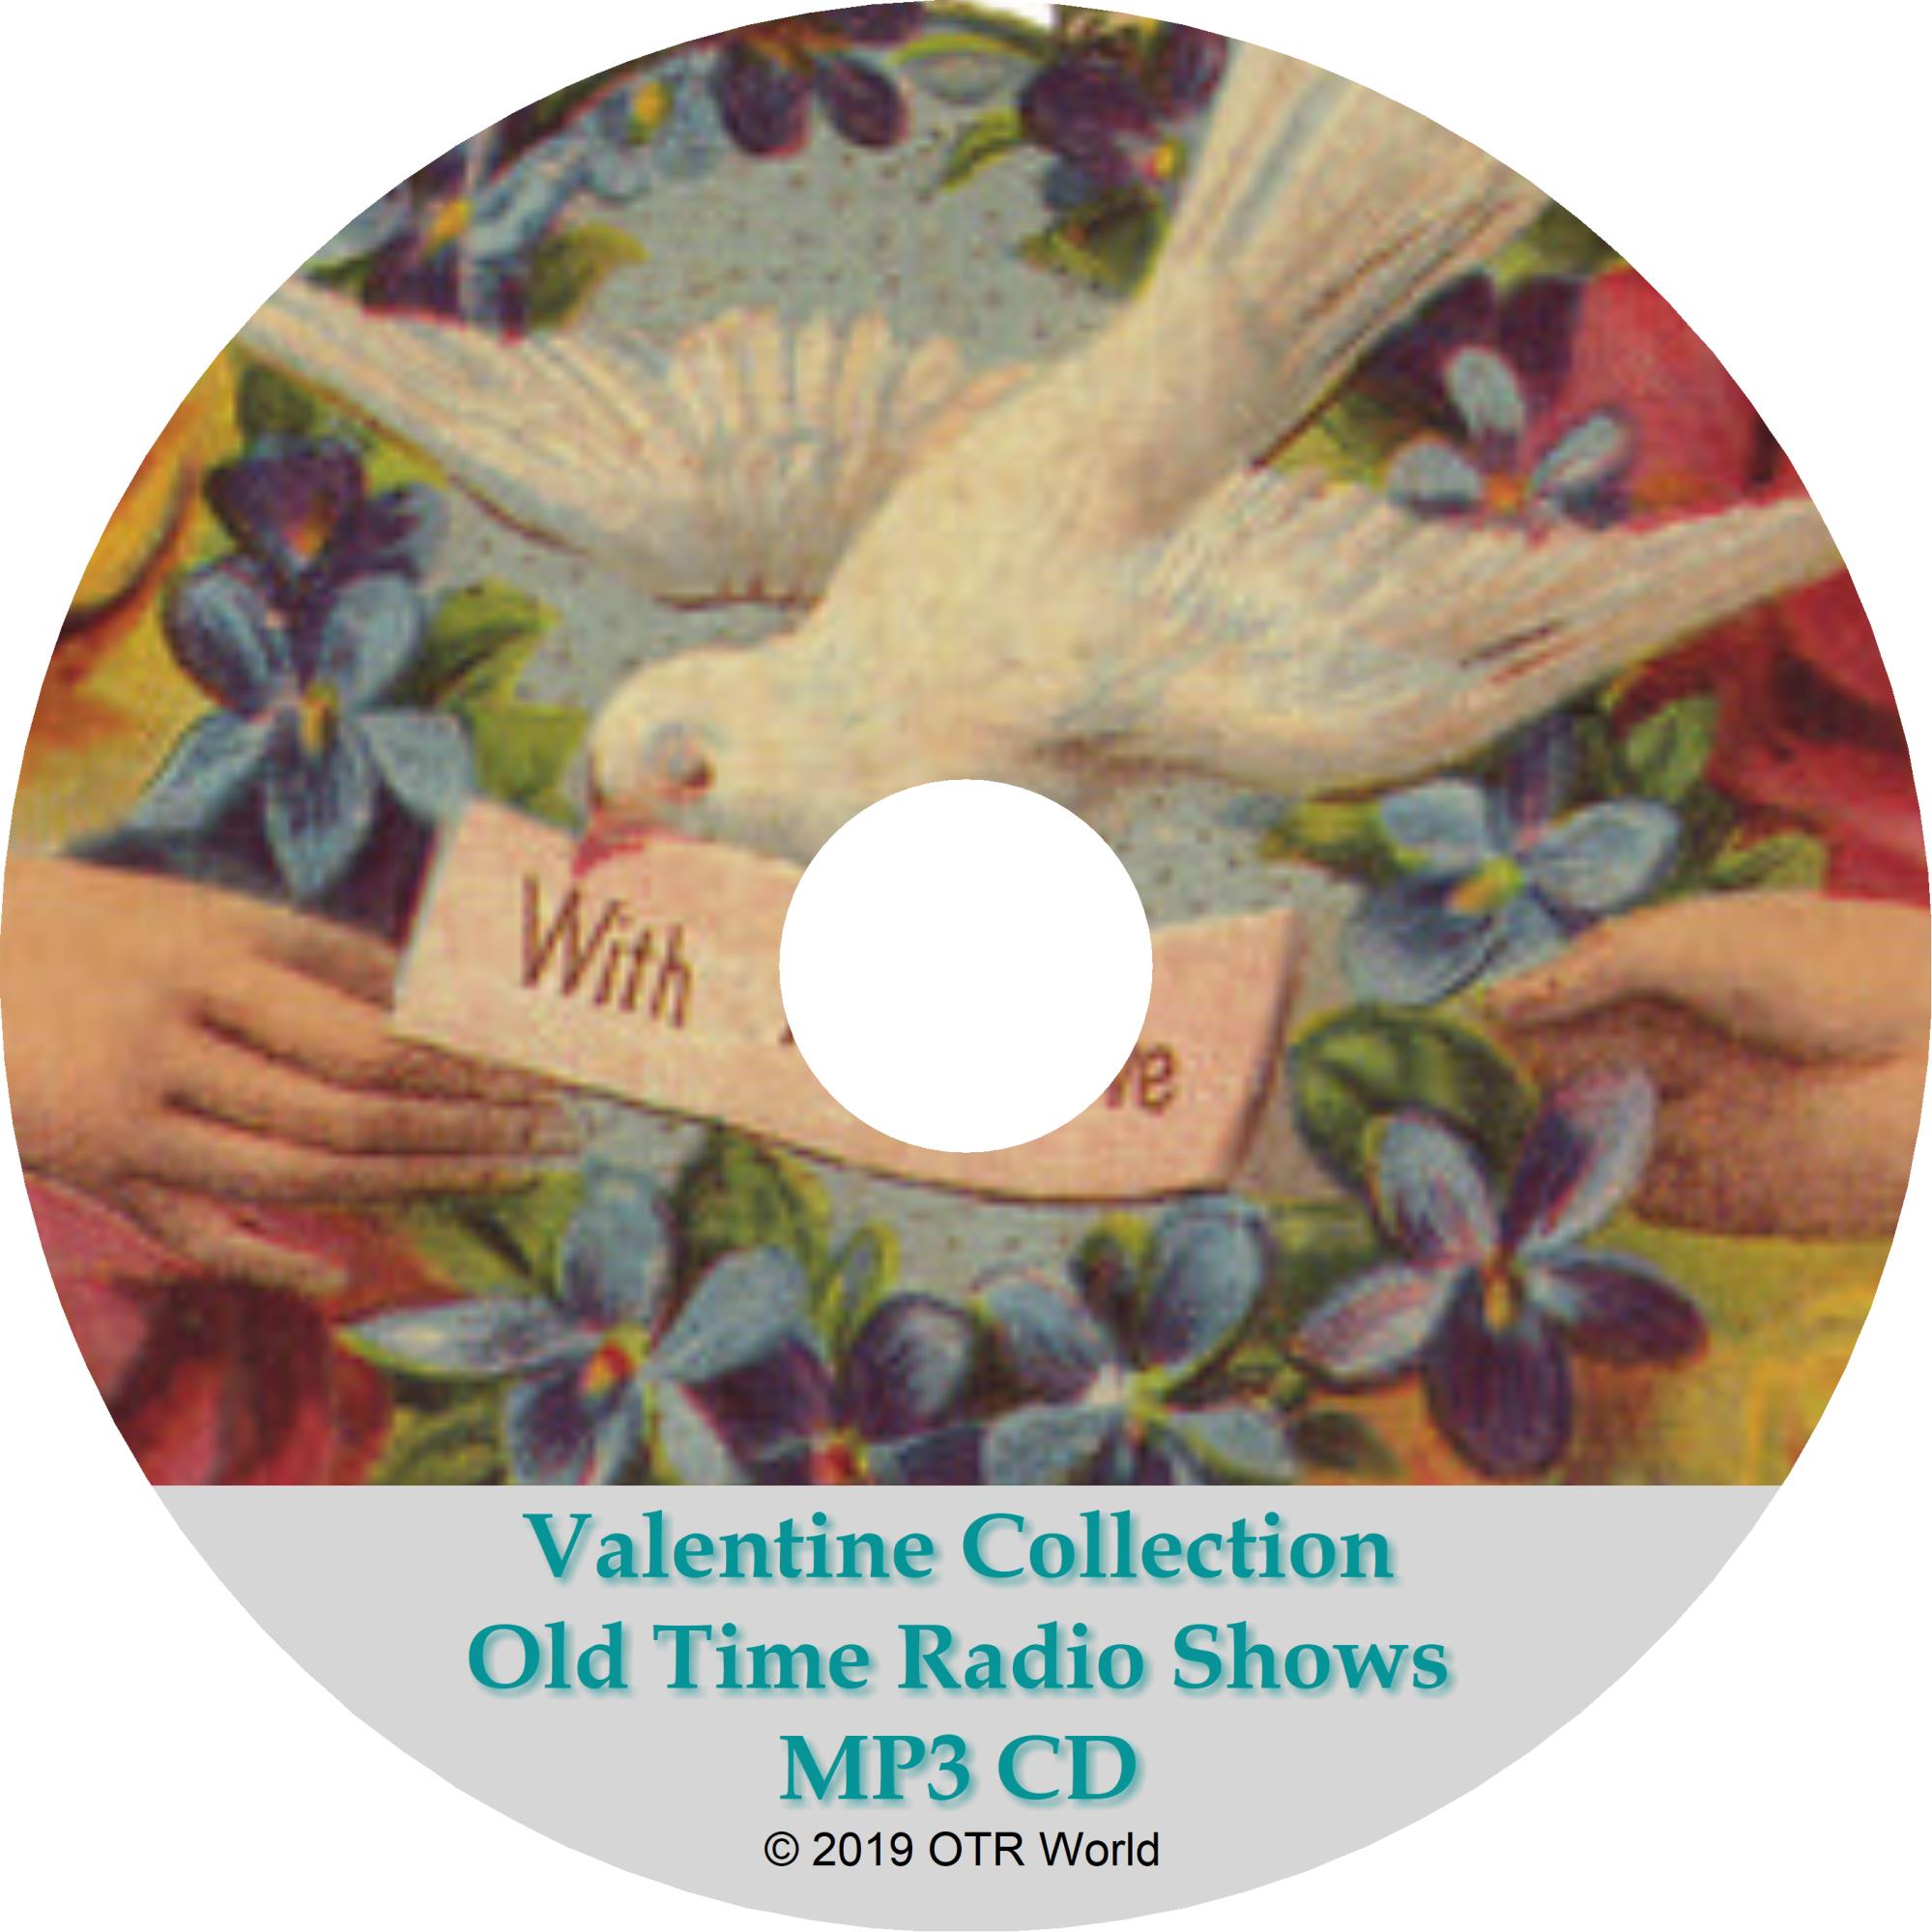 Valentine Collection OTR Old Time Radio Show MP3 On CD-R 32 Episodes